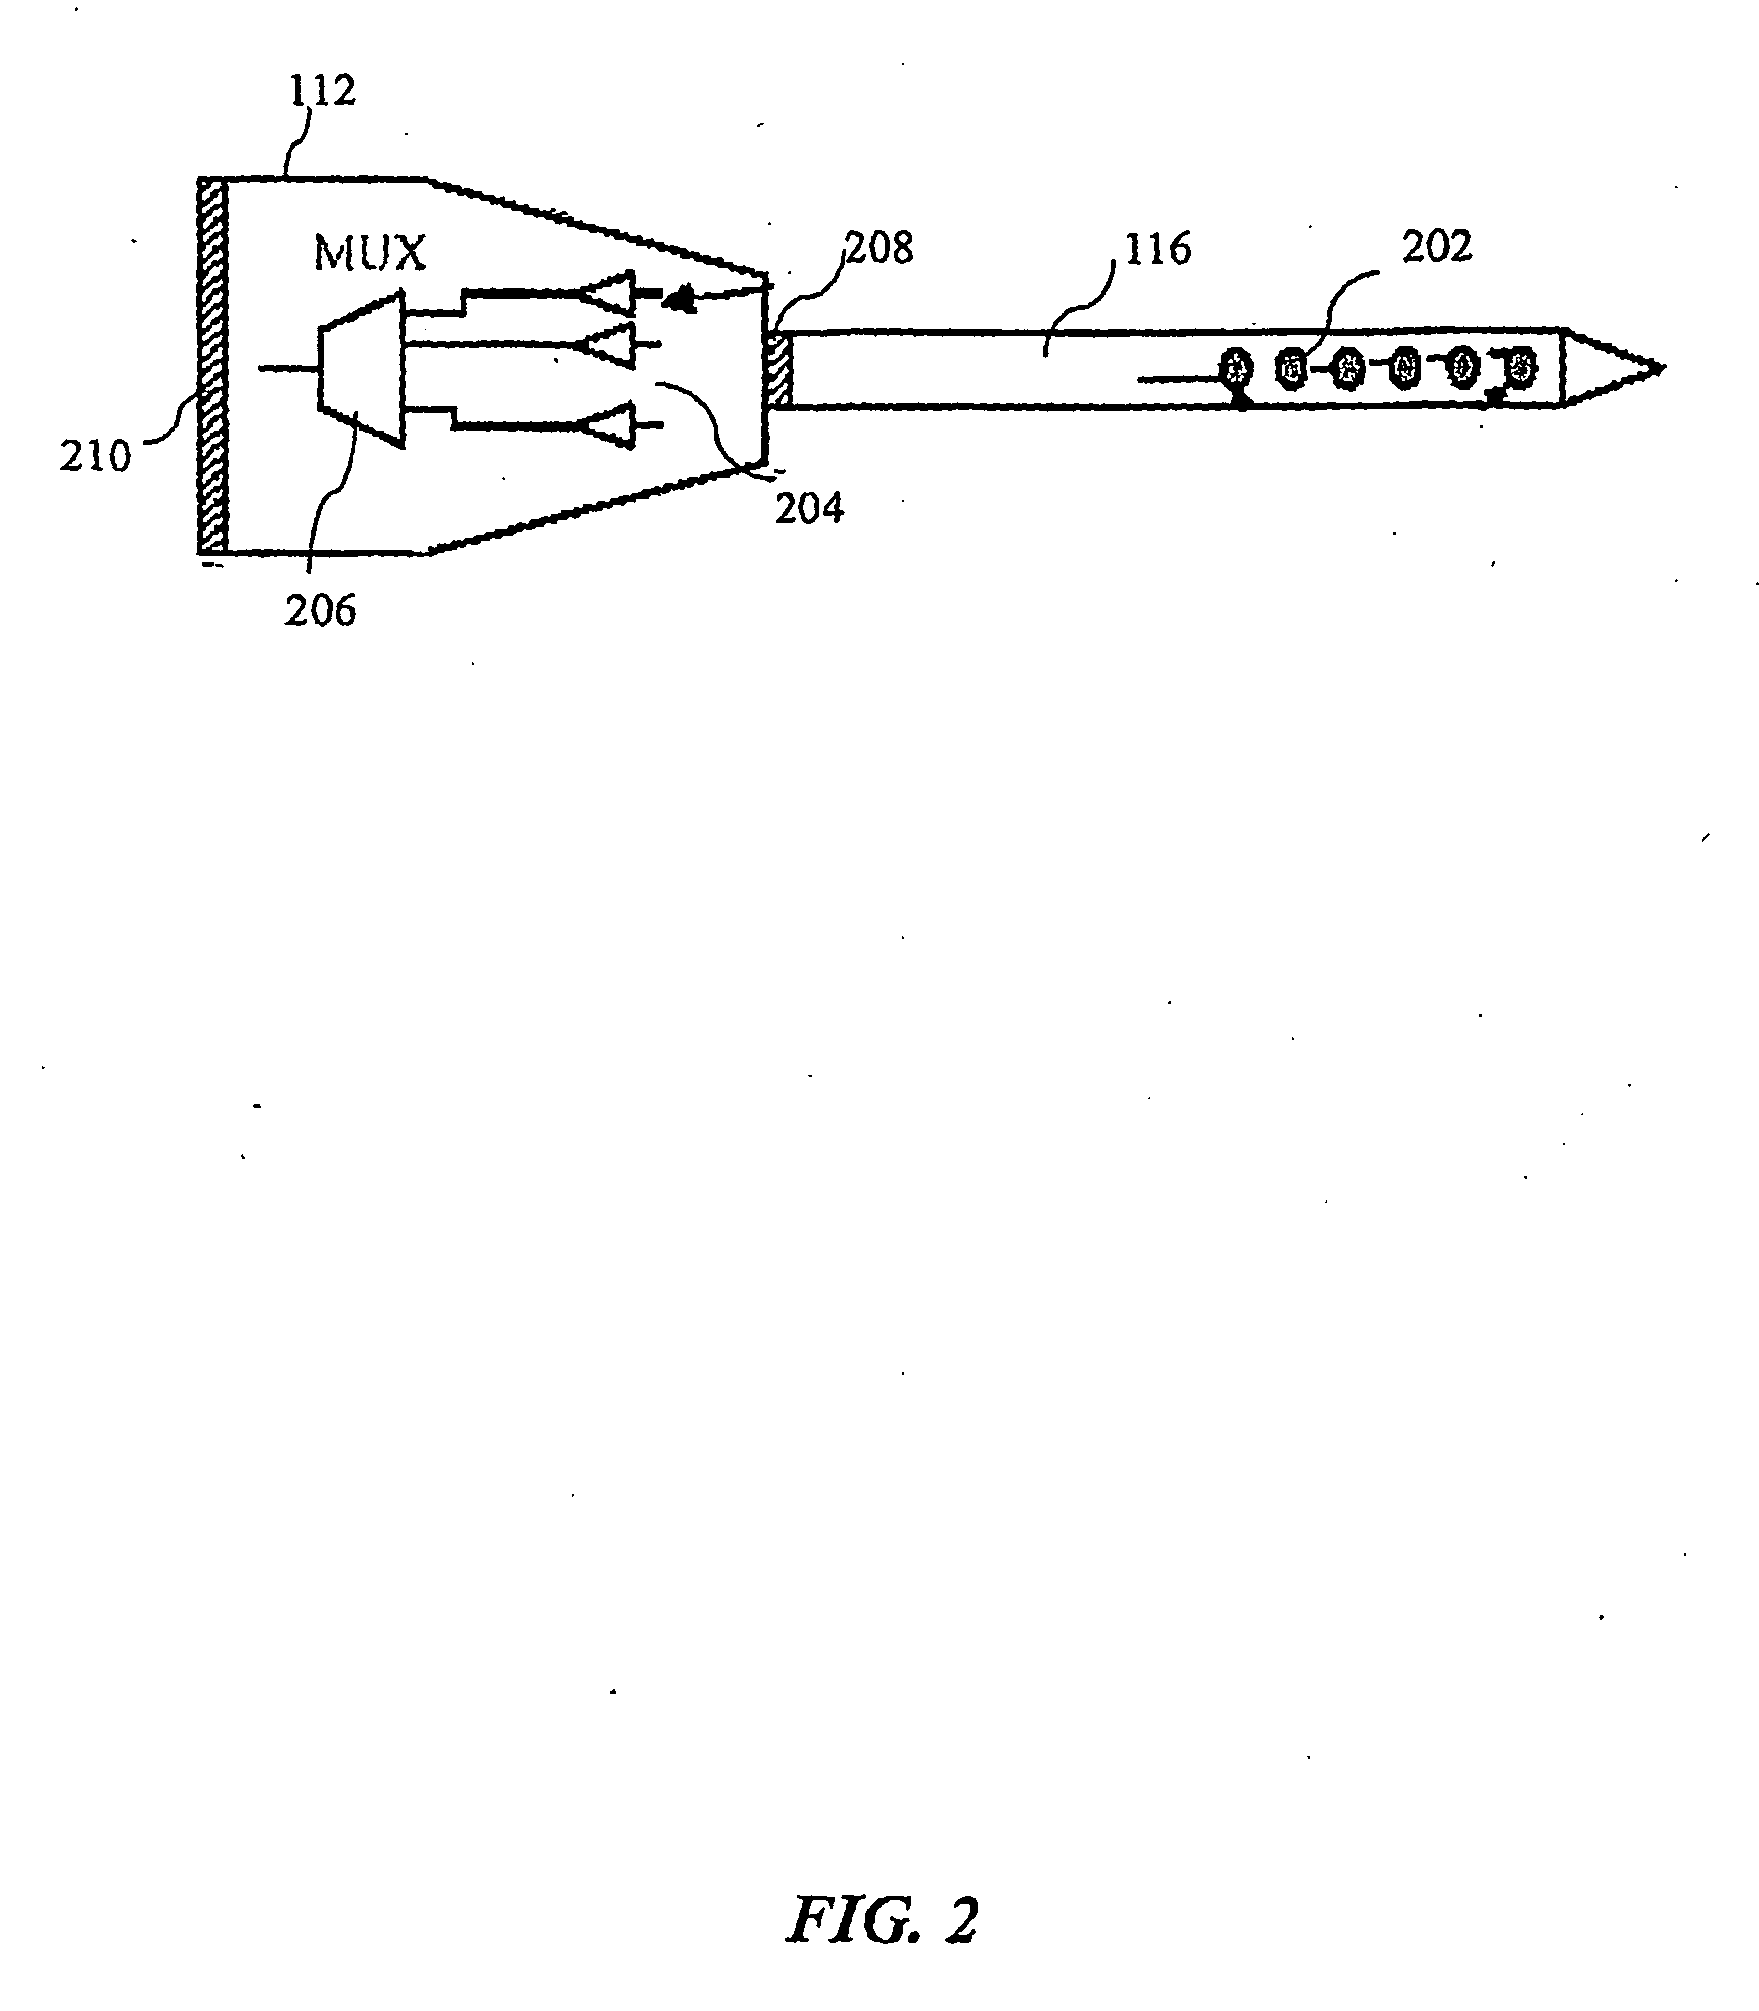 Neuralprobe and methods for manufacturing same